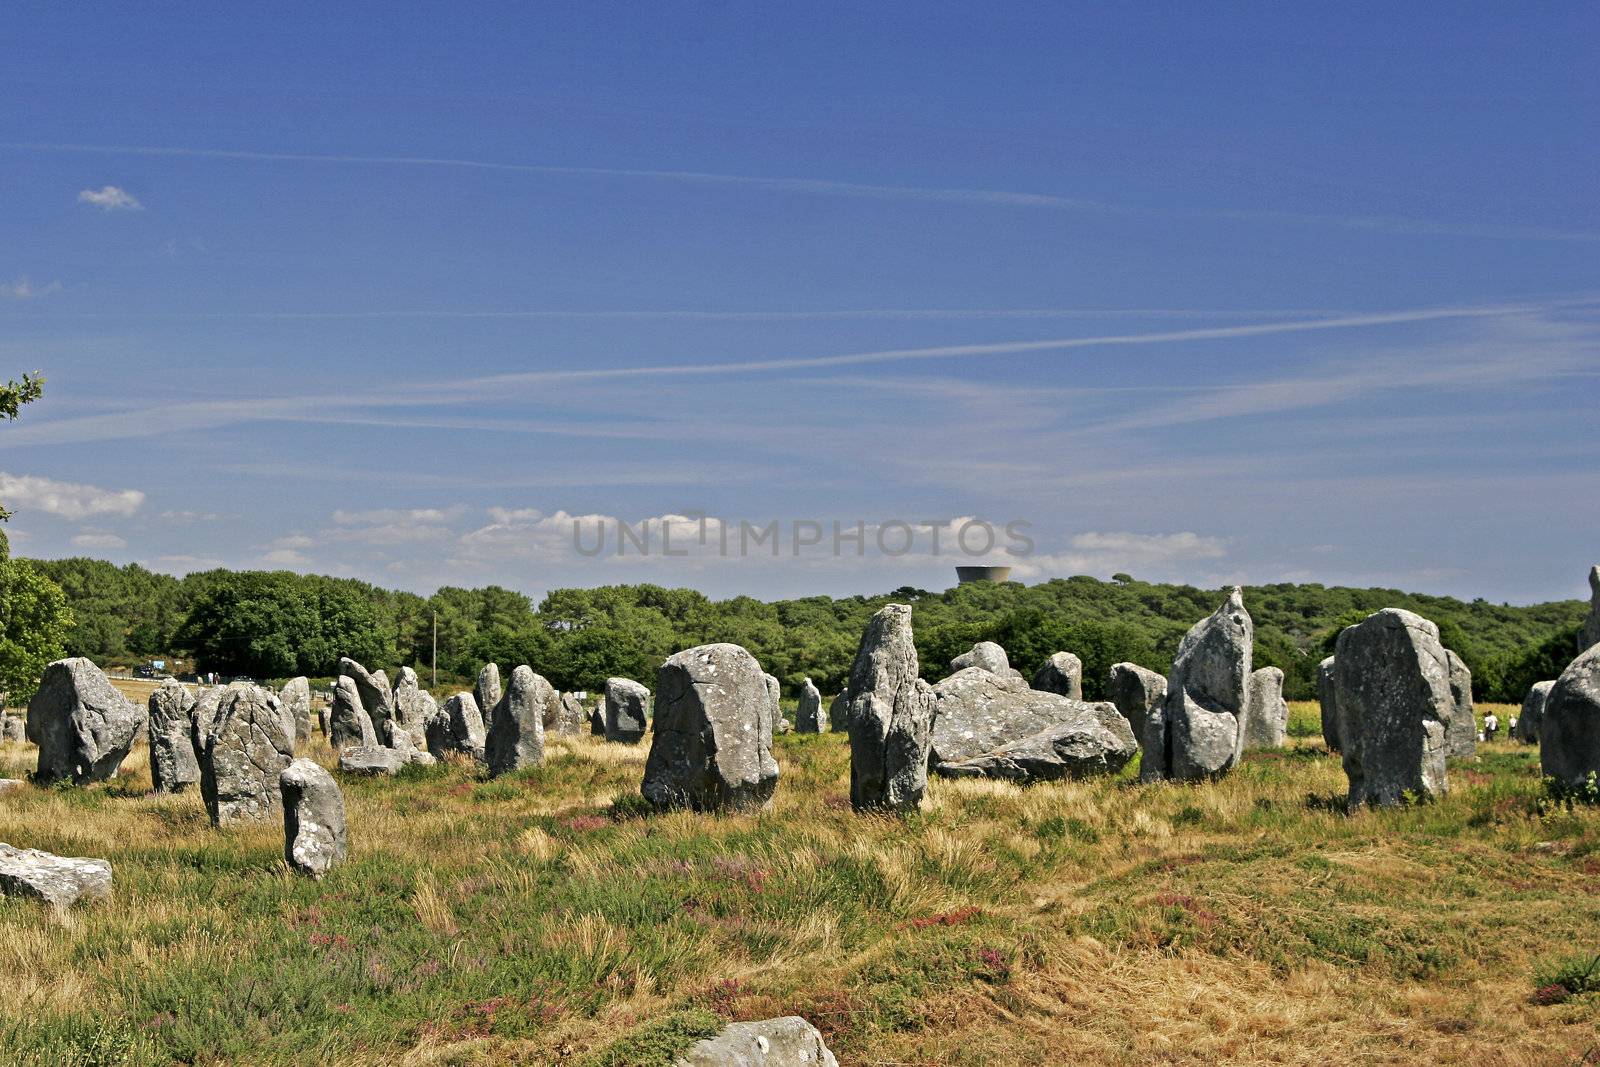 Kermario, Megaliths, stone graves near Carnac, Brittany by Natureandmore